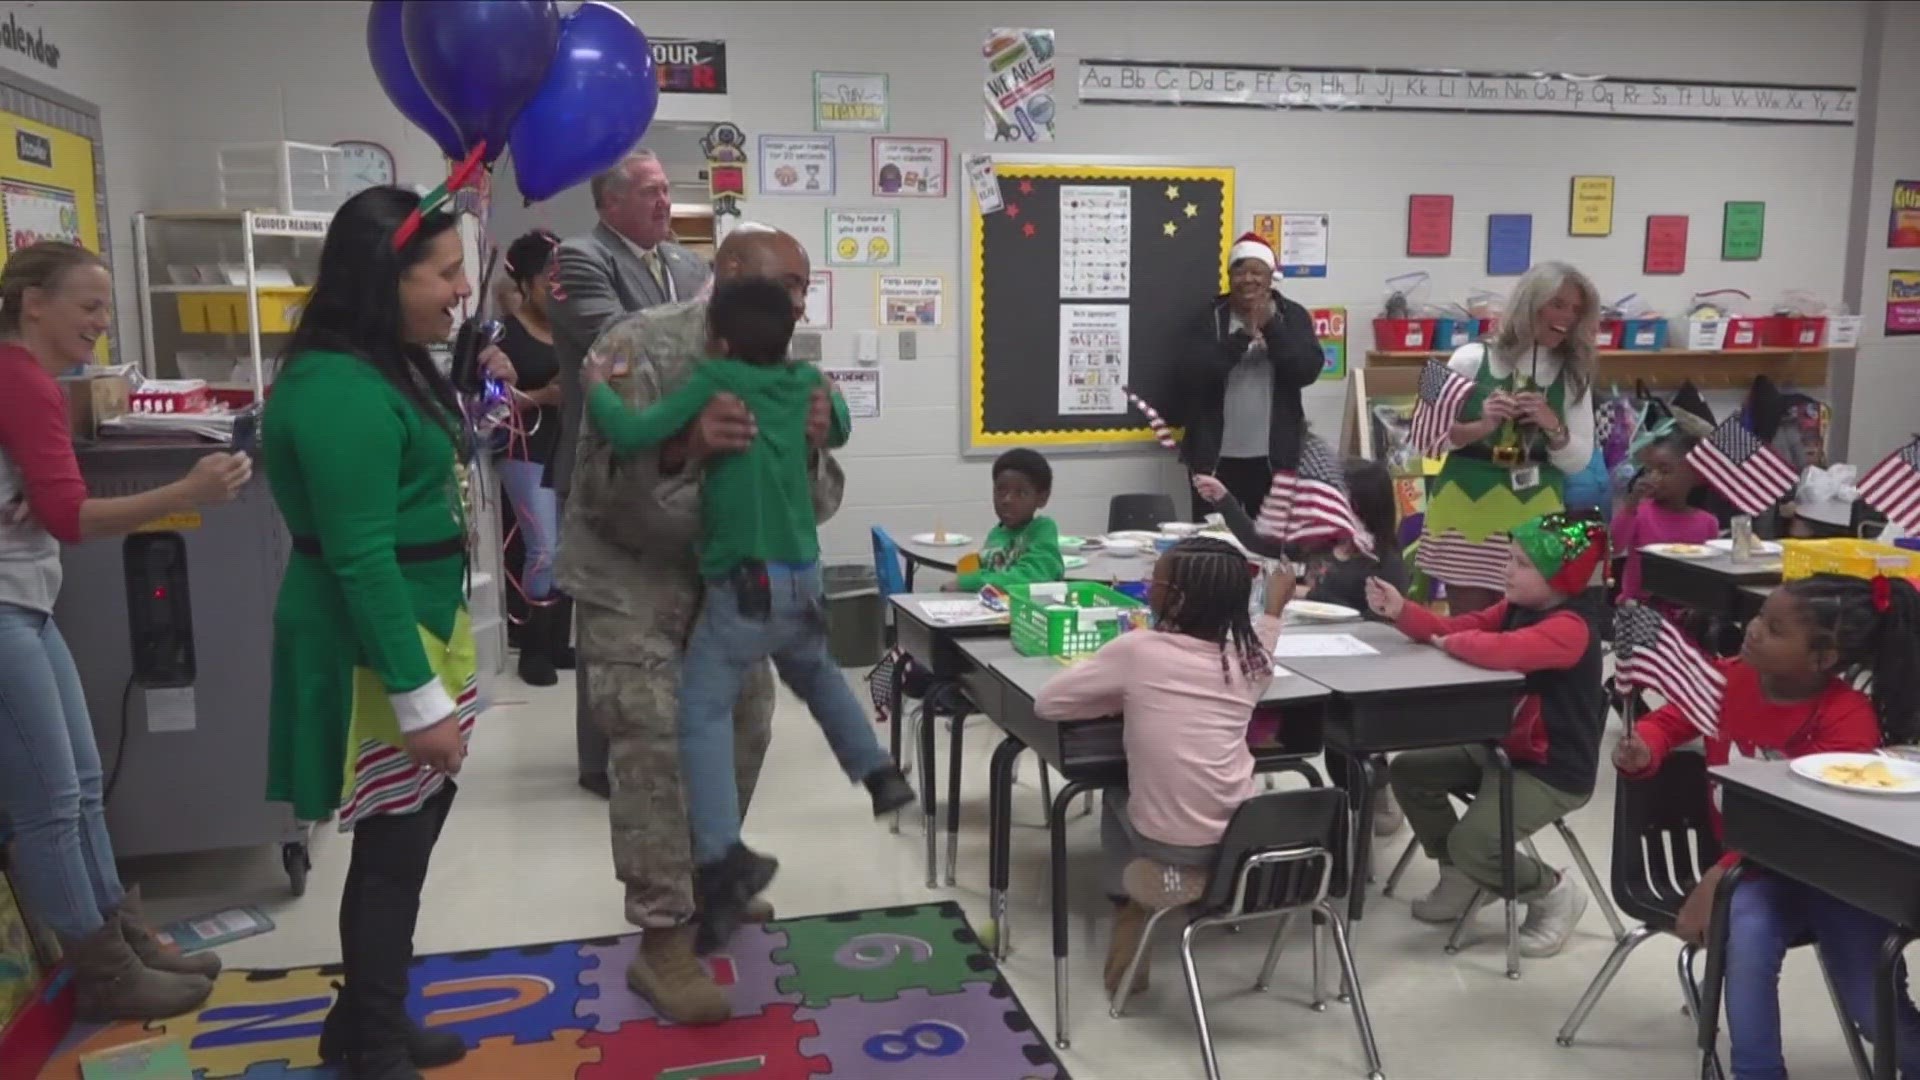 U.S. Army Captain Travis Kelly surprised 7-year-old Langston at Millington Primary School as teachers and classmates cheered.